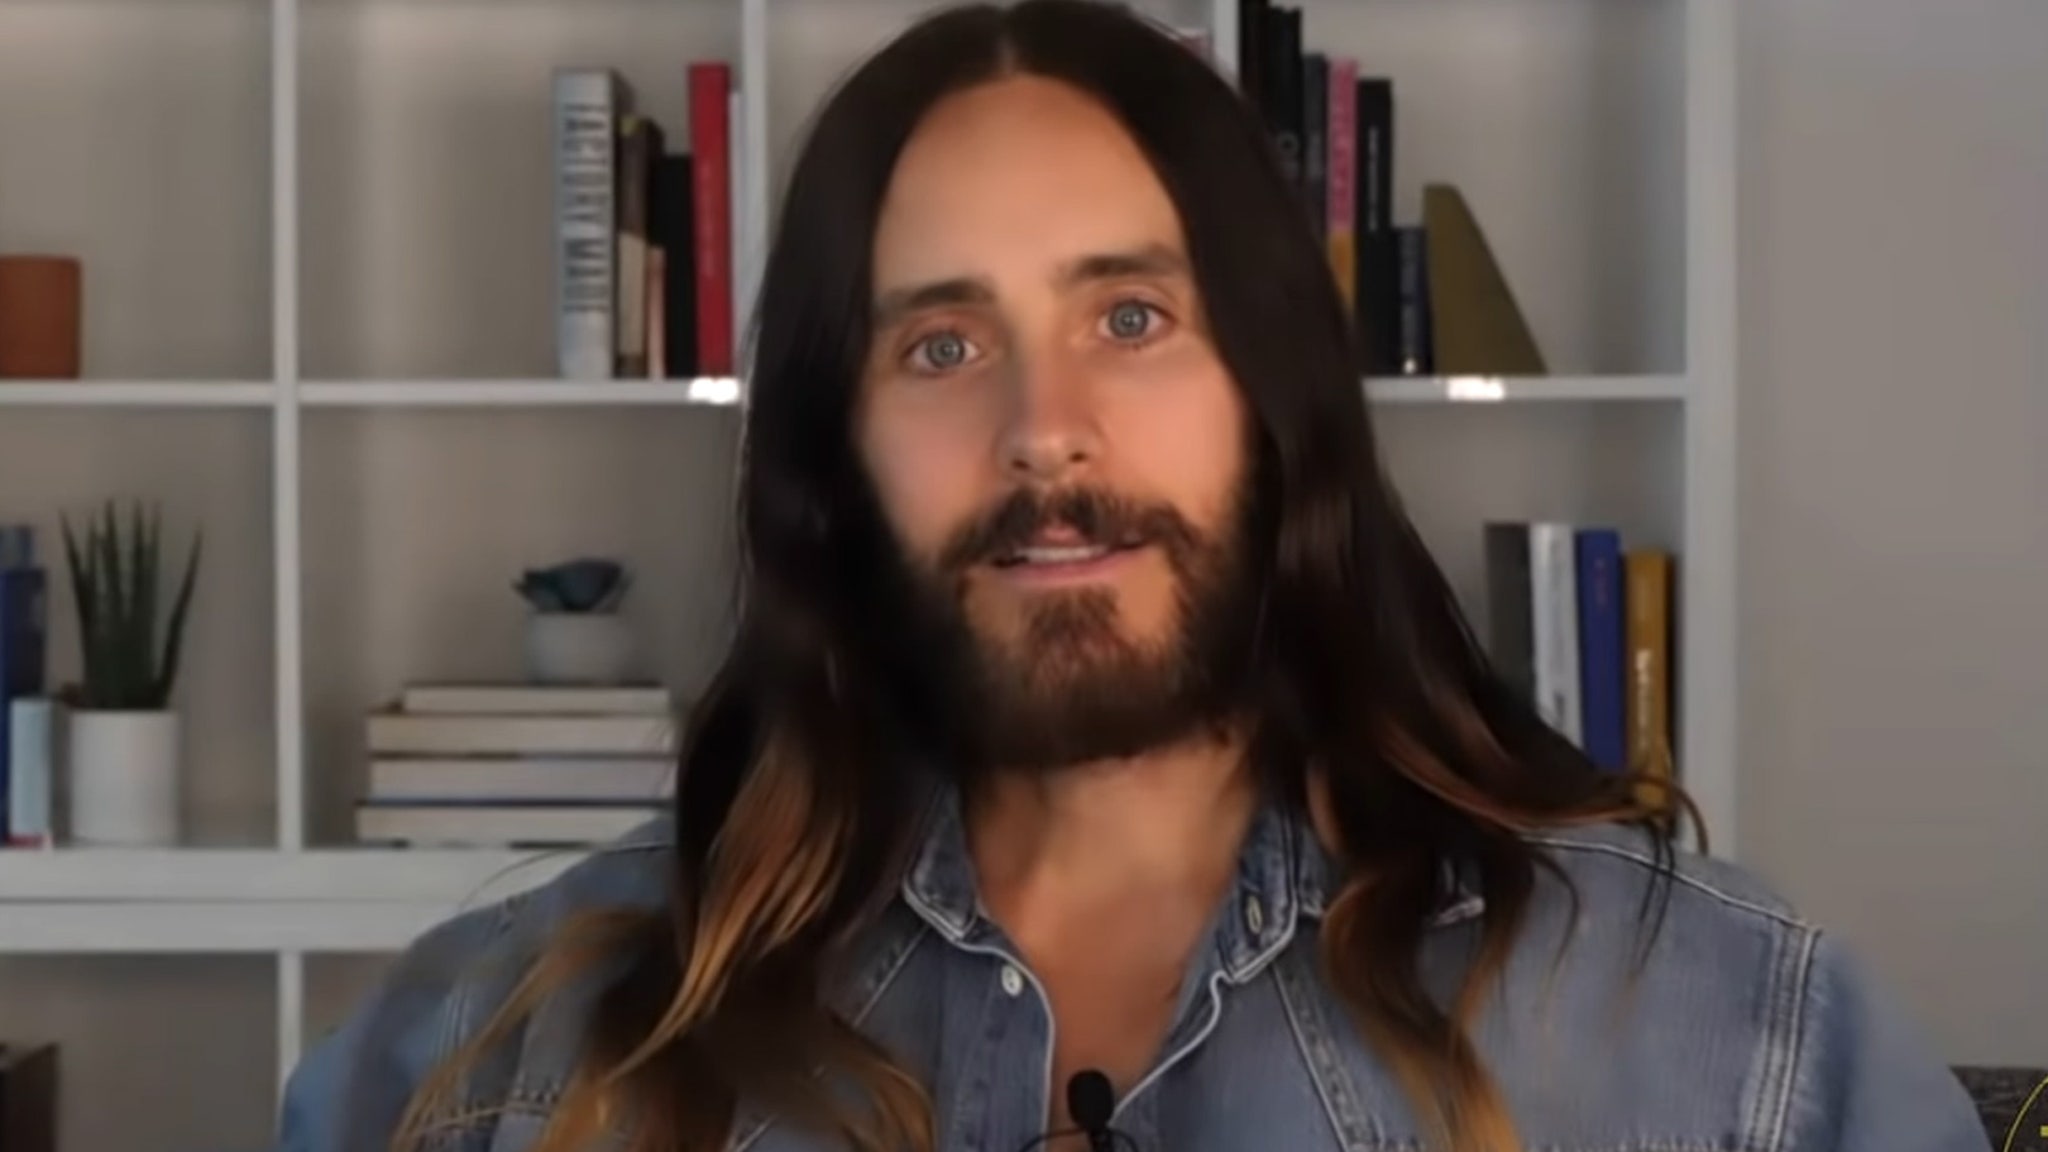 Jared Leto recalls the return of a silent meditation retreat to the shutdown of Covid-19